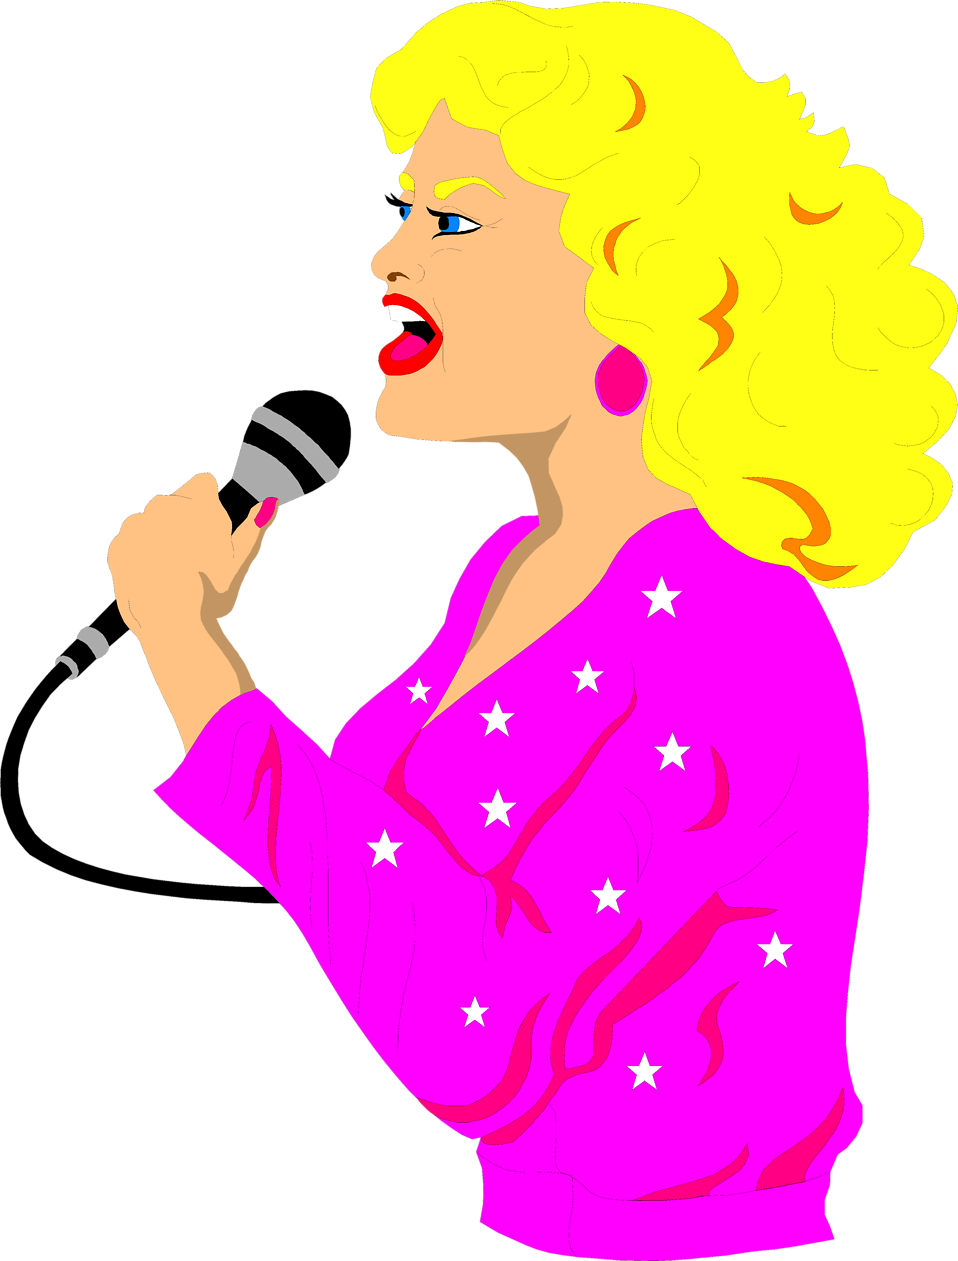 Singer   Free Stock Photo   Illustration Of A Beautiful Blond Singer